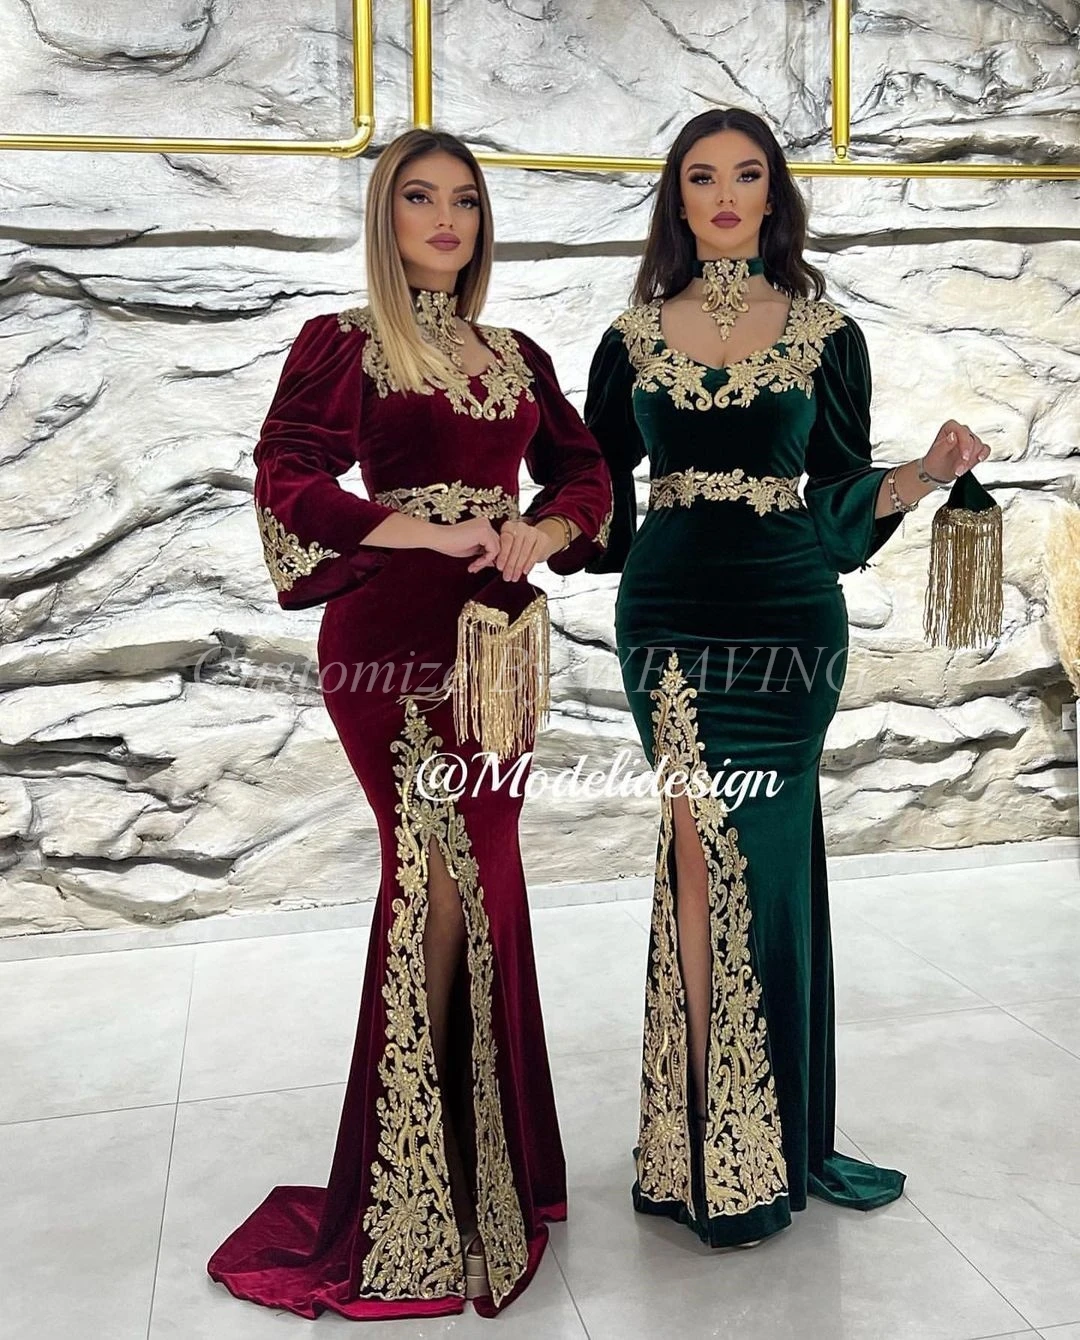 

Long Sleeves Prom Dresses Mermaid Square Neck Appliques Beadings Floor Length Saudi Arabic Evening Gowns Formal Party Dress